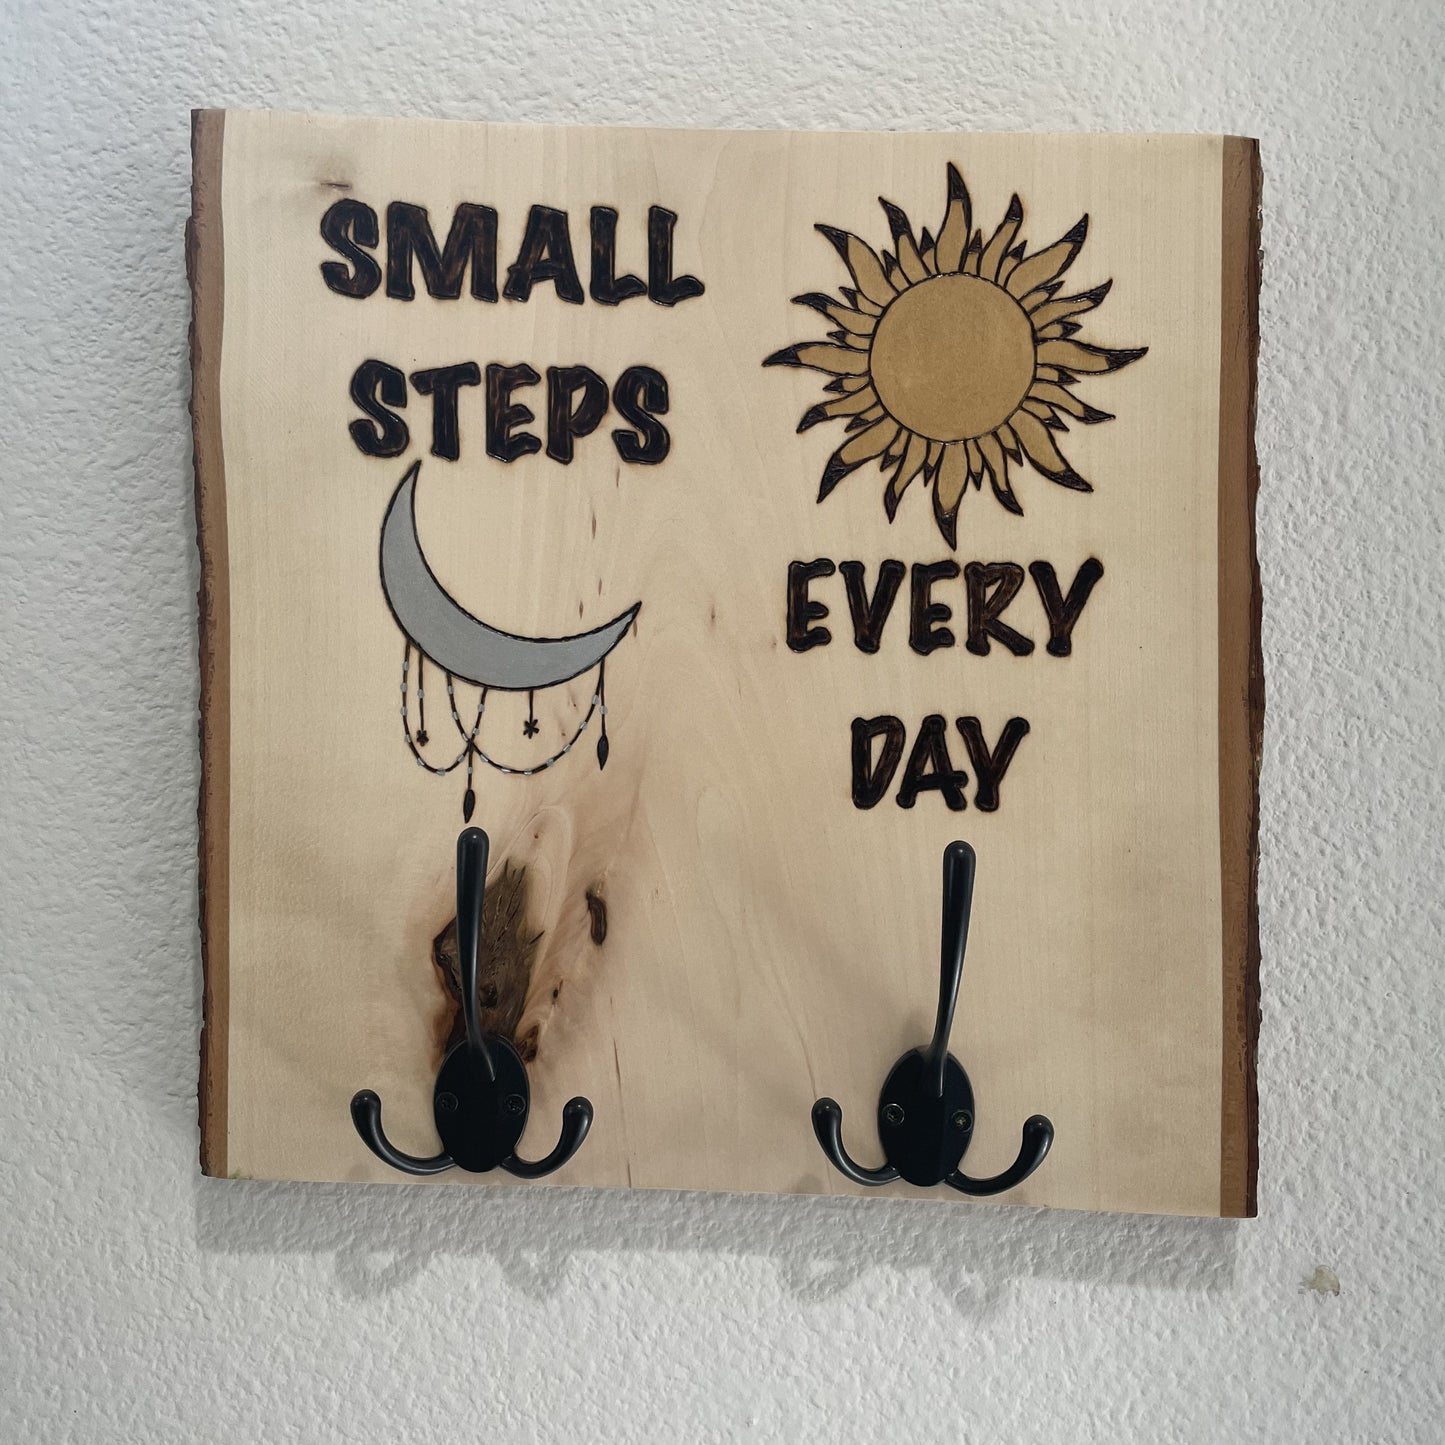 Small Steps Every Day Wood Burned and Painted with Keys Hooks Coat Hooks and Backing for Wall Hanging